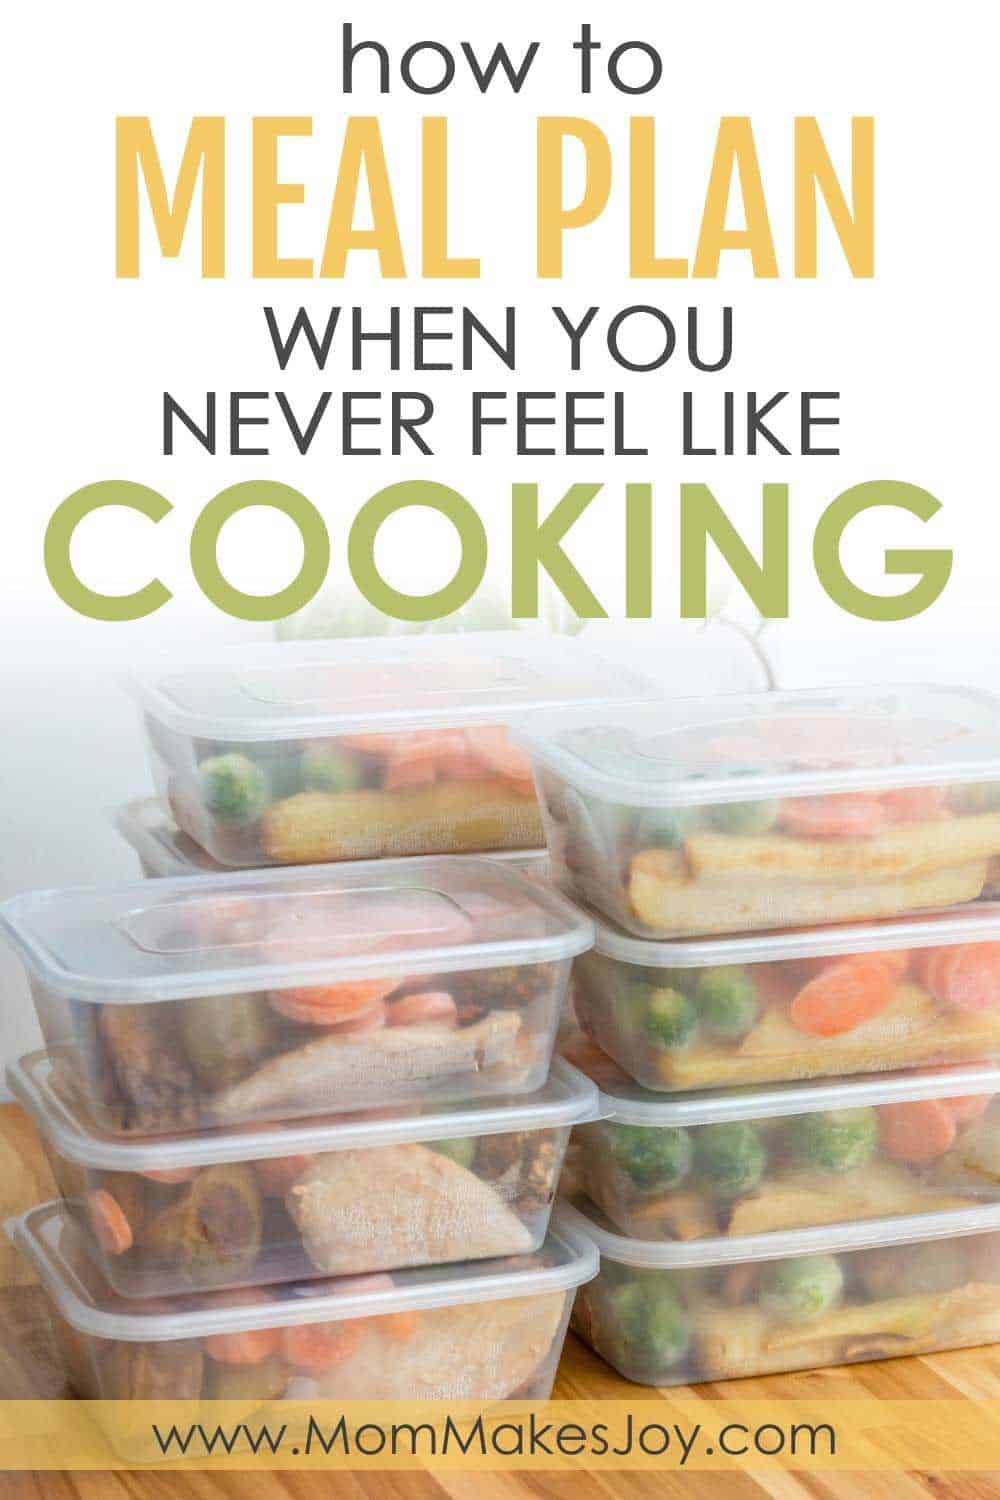 How to meal plan when you never feel like cooking